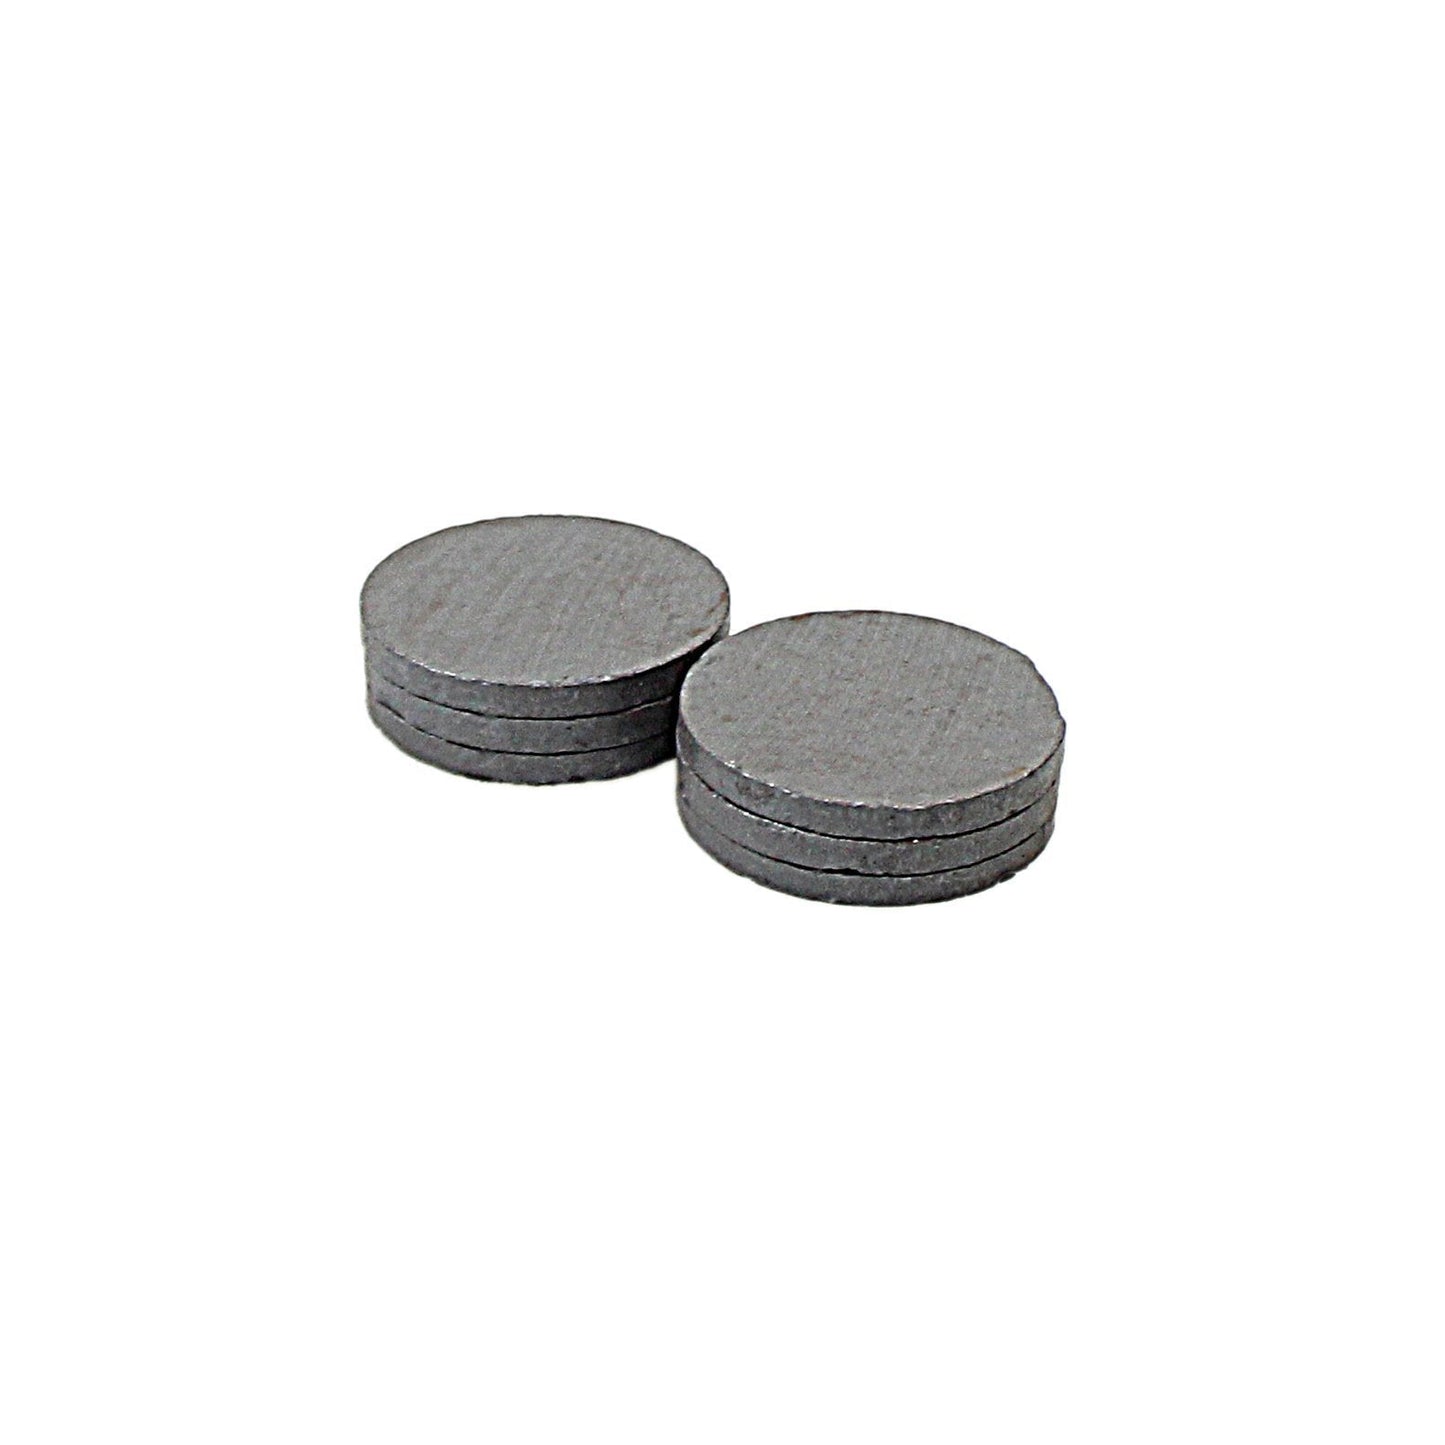 Round Magnets 25 mm Pack of 8 4920 (Large Letter Rate)